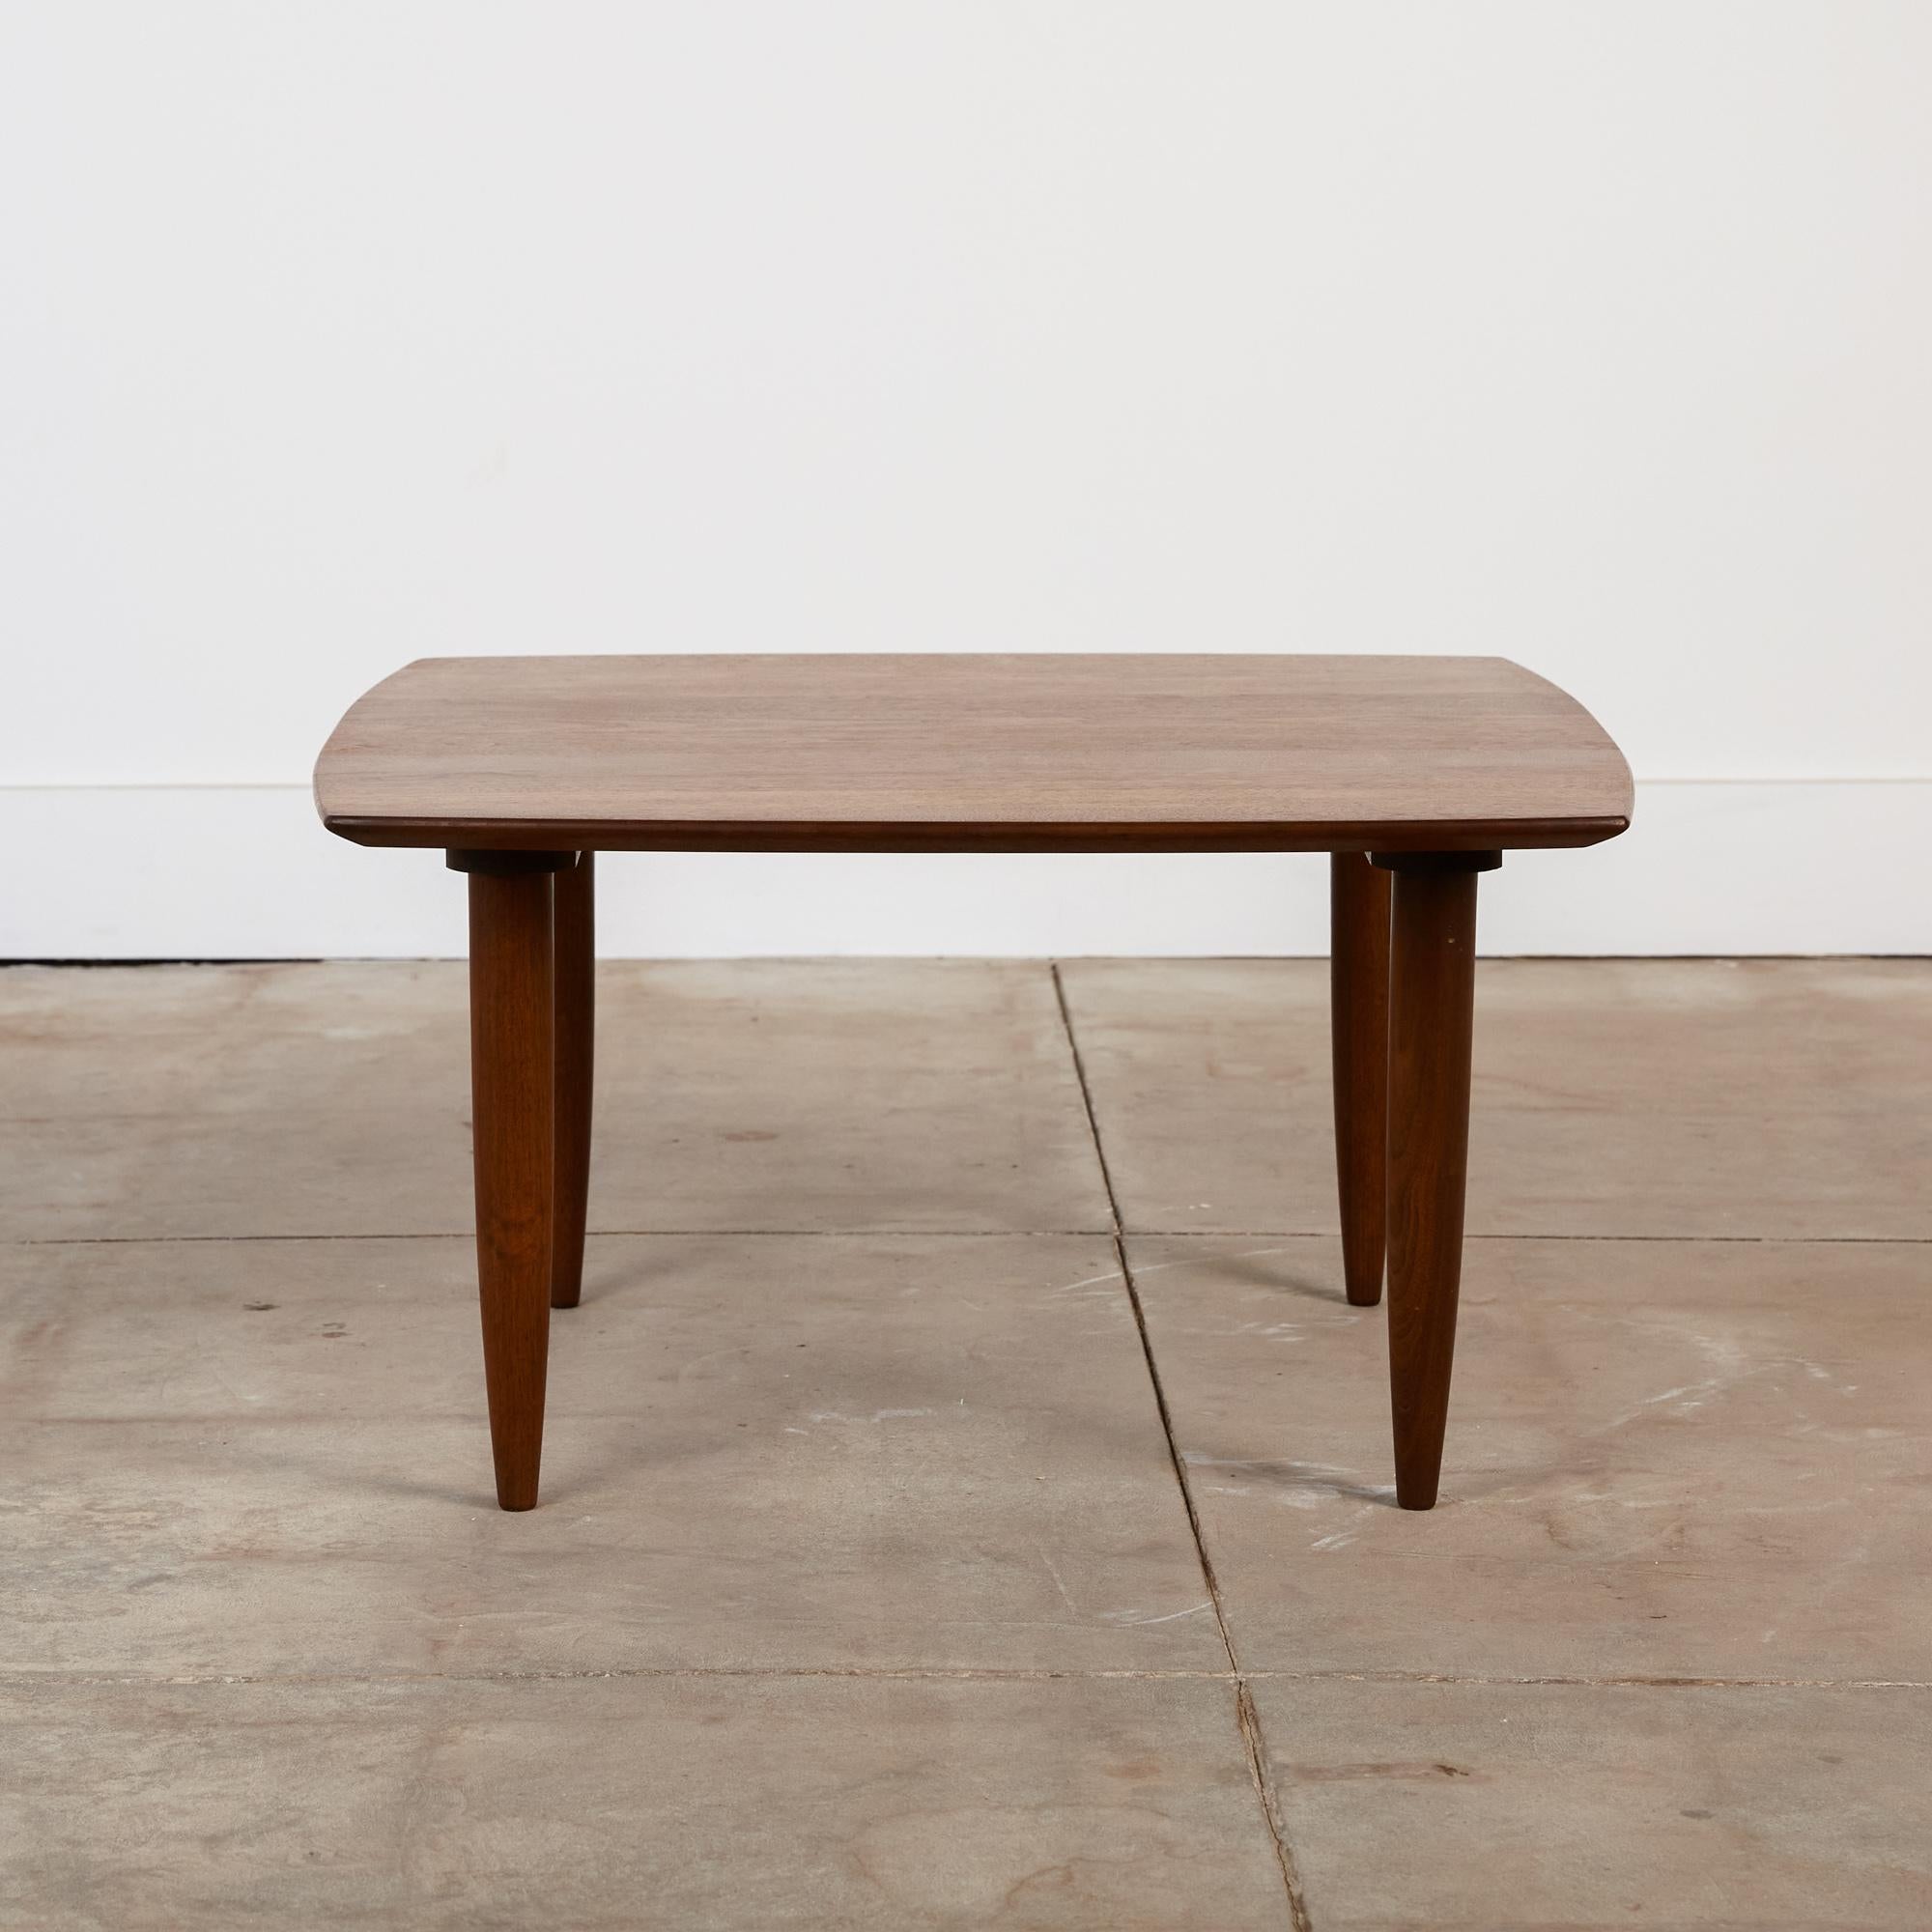 Produced by Ace-Hi of Gardena, Calif., the Prelude line of furniture featured solid walnut construction and simplified (but never reductive) purity of form. This Prelude table has a rounded square shape, with slightly bowed edges and a tidy corner